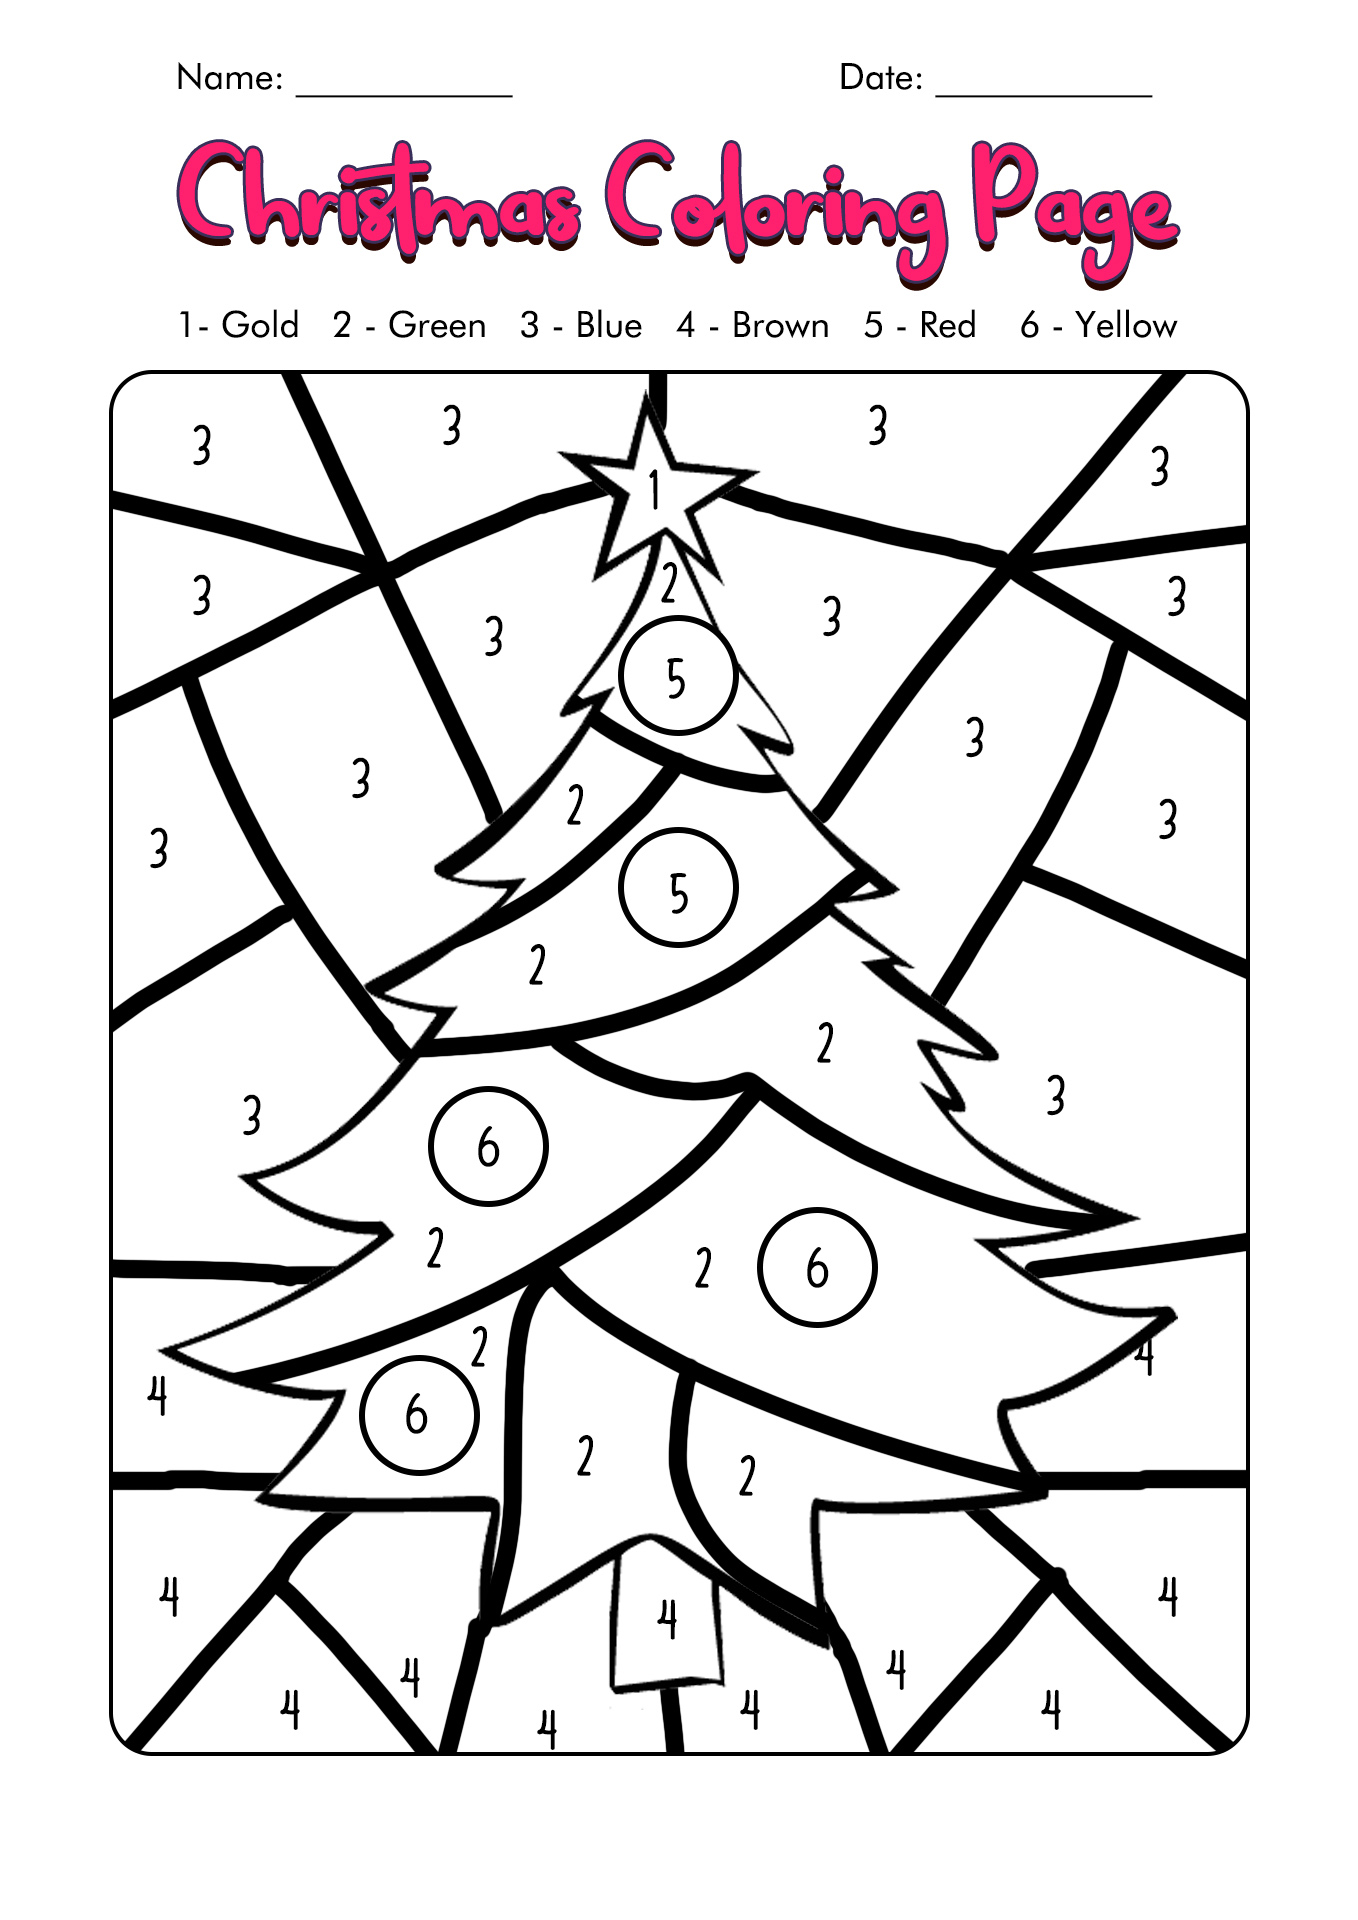 Christmas Color by Number Coloring Pages